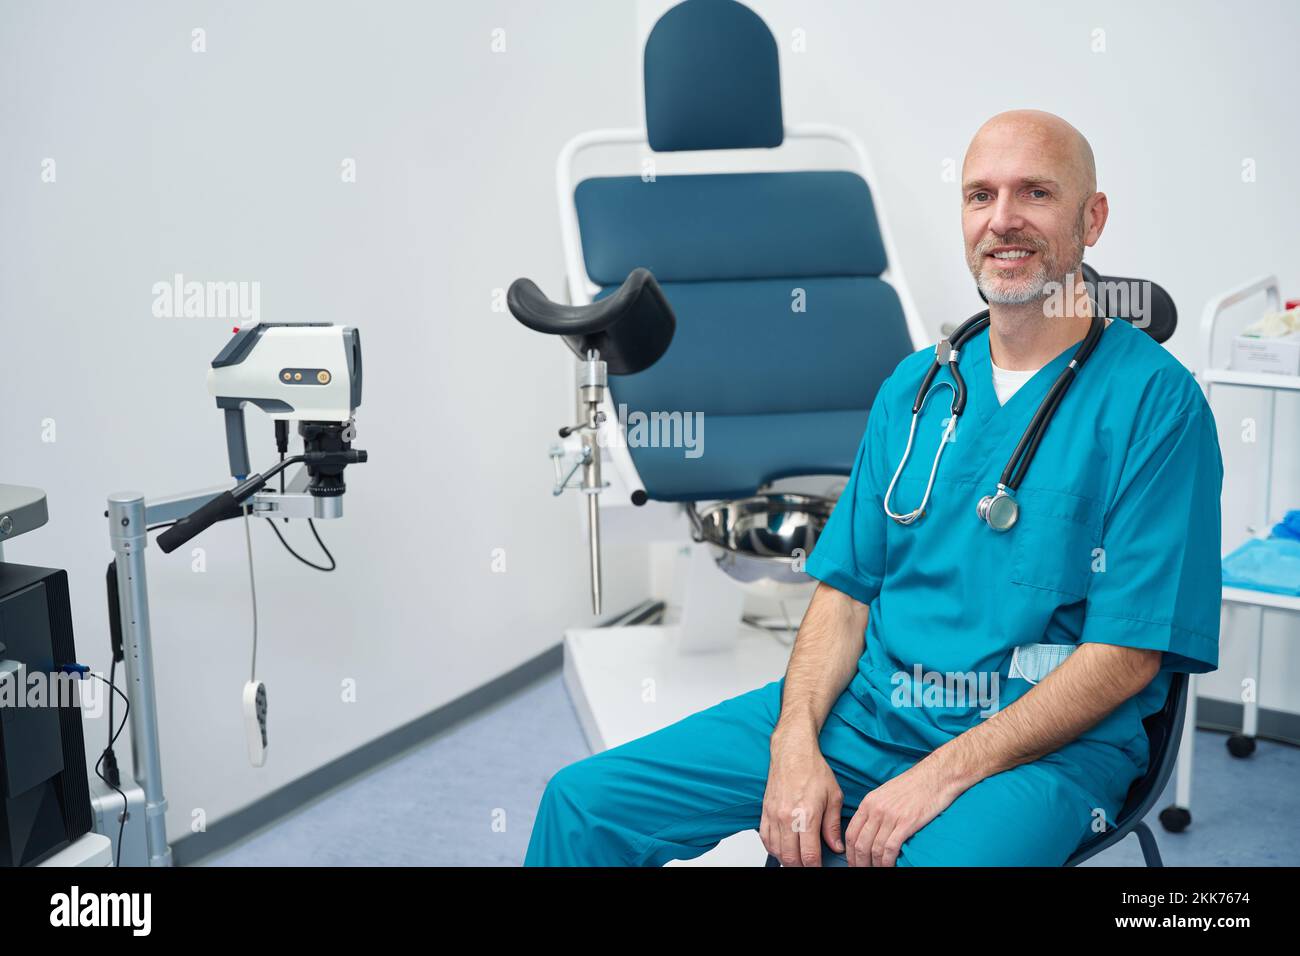 Doctor in medical uniform is next to gynecological examination chair Stock Photo